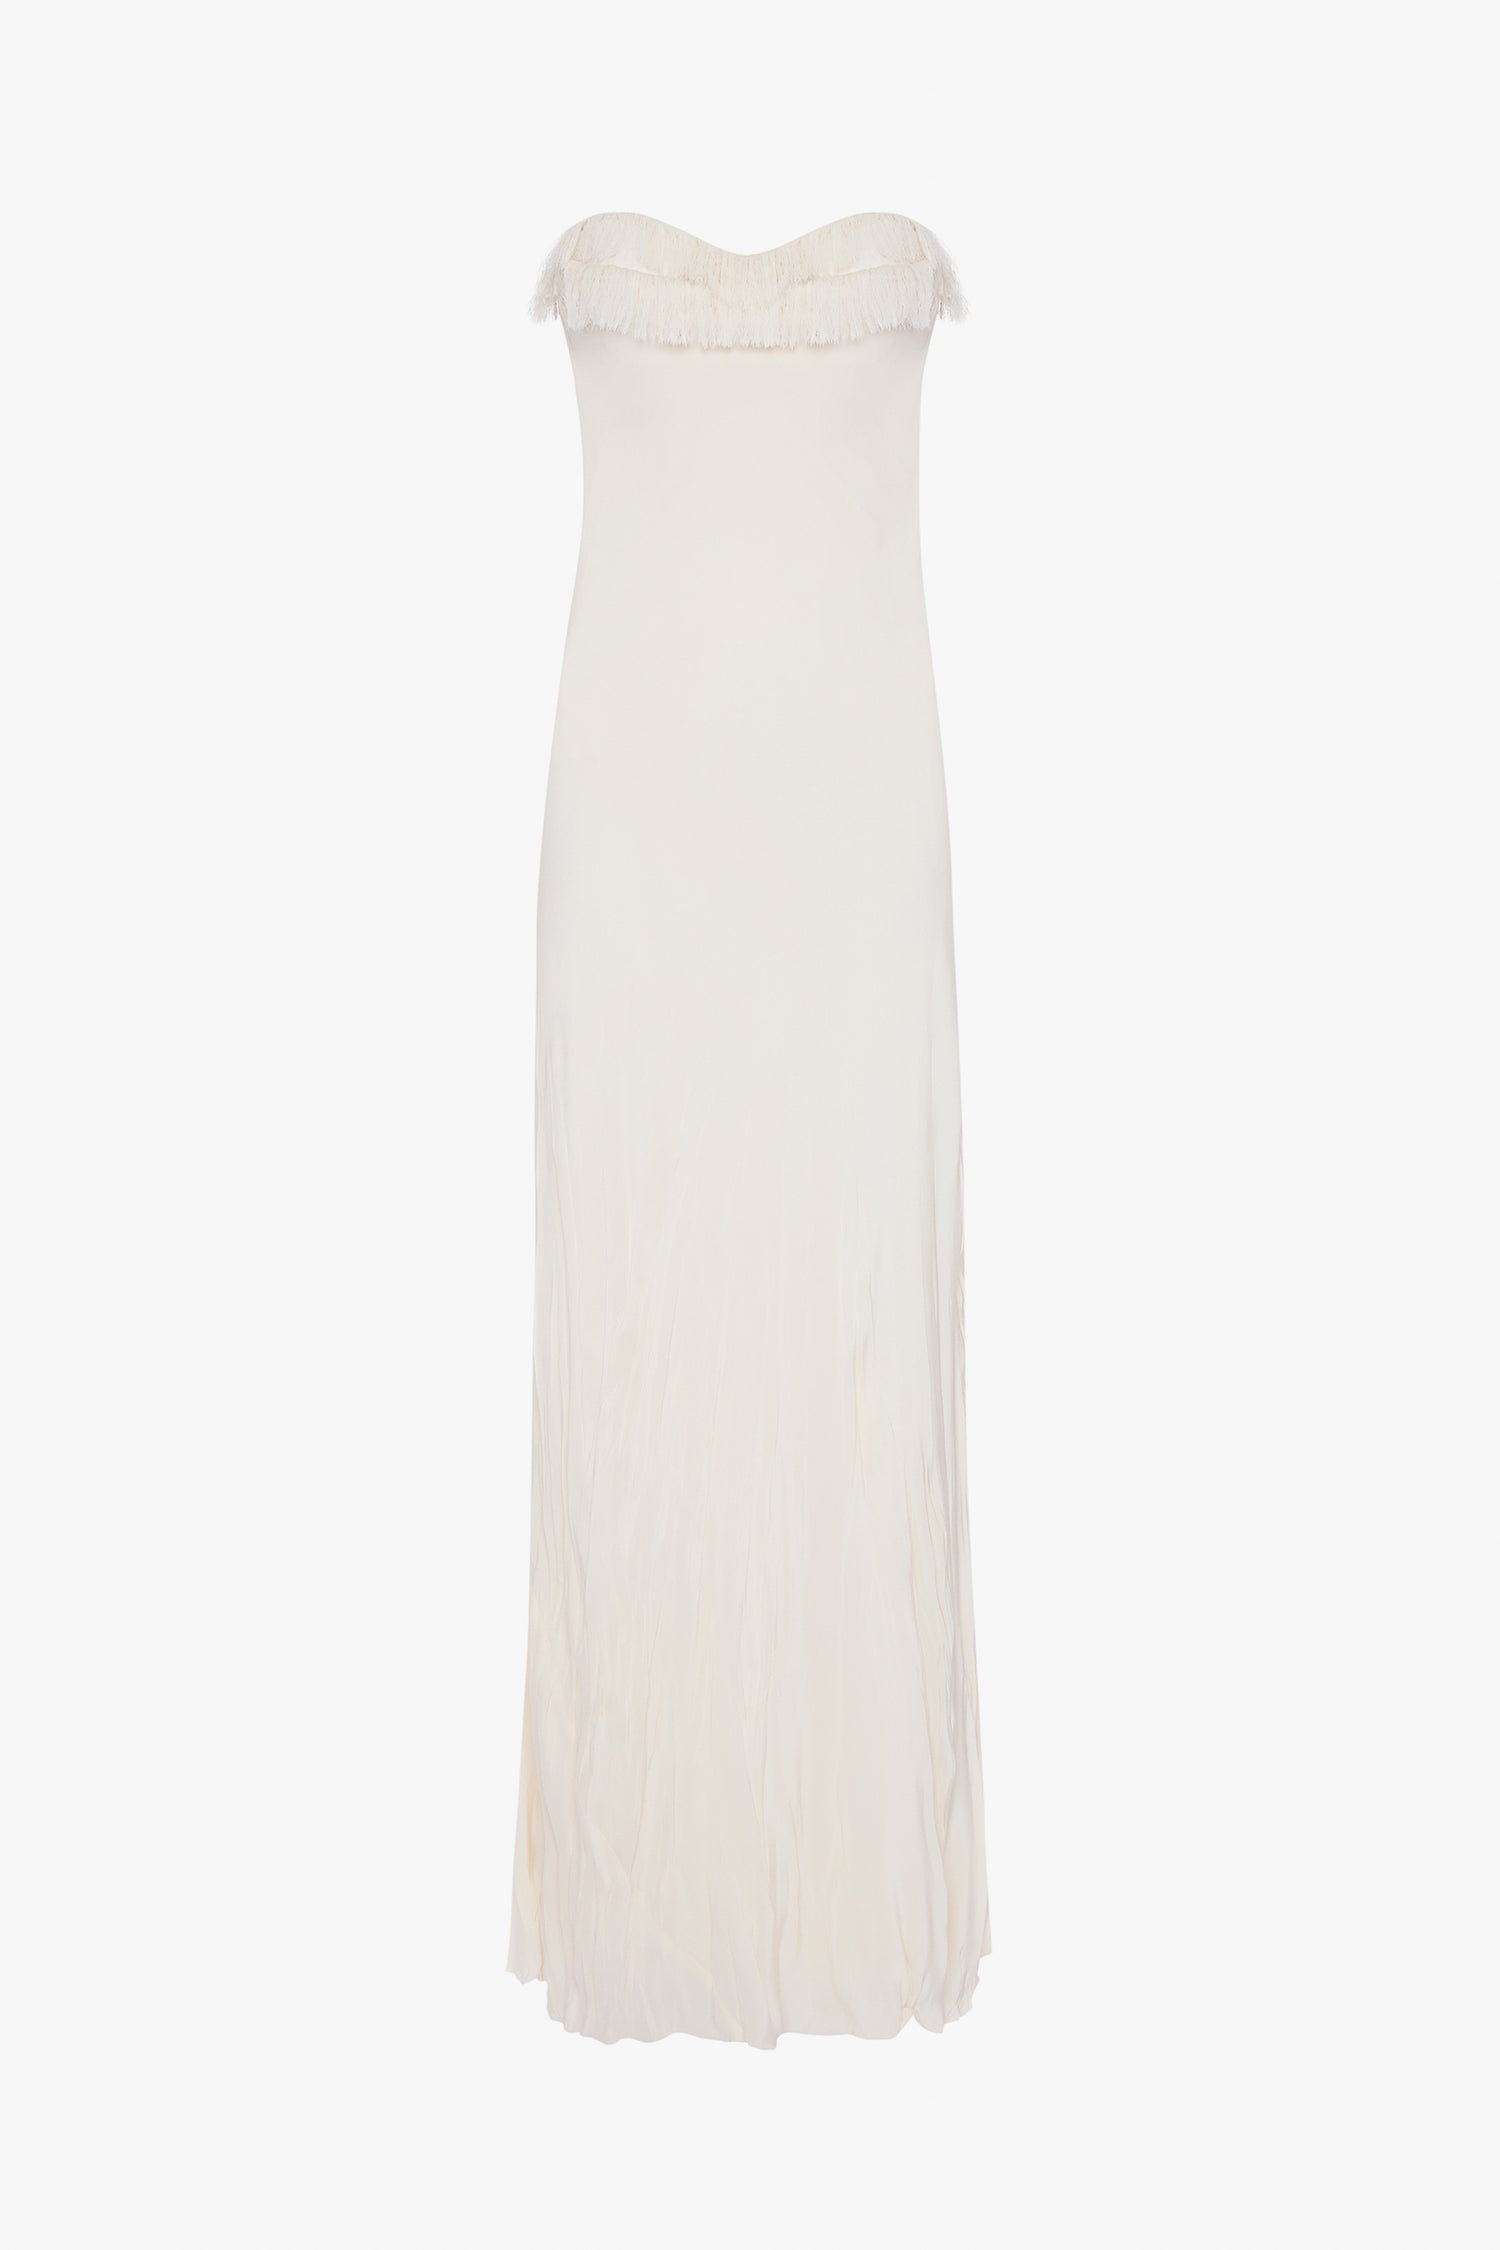 An elegant Ivory Victoria Beckham off-the-shoulder gown with corset detail and a smooth, crease-effect skirt, displayed against a plain white background.